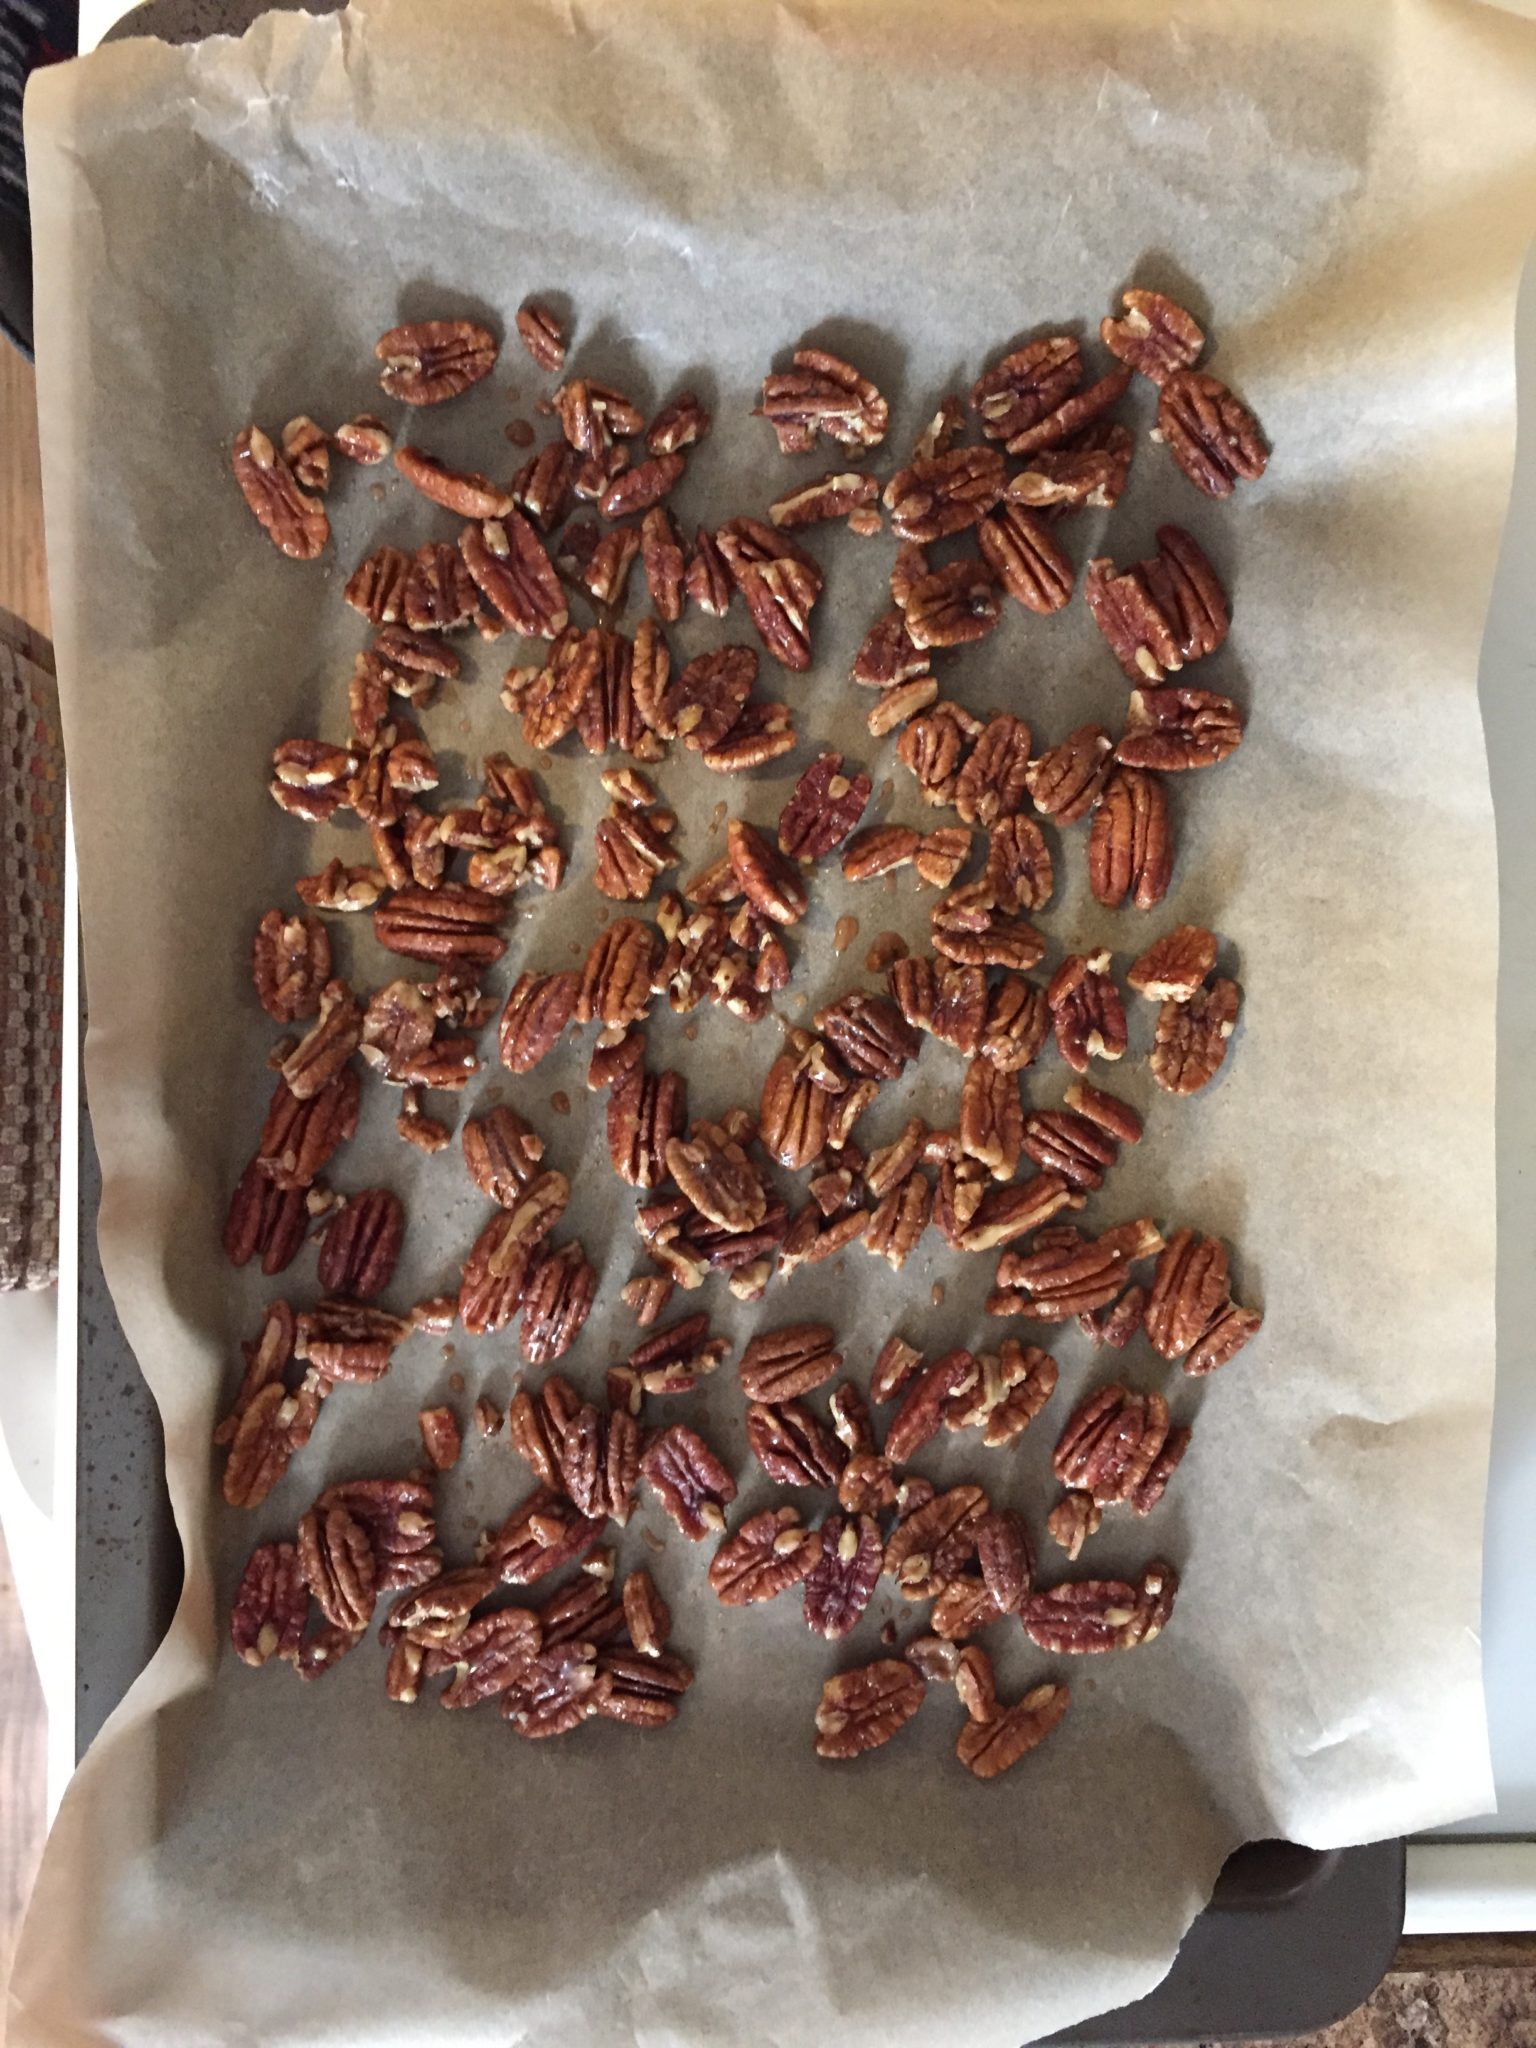 maple candied pecans